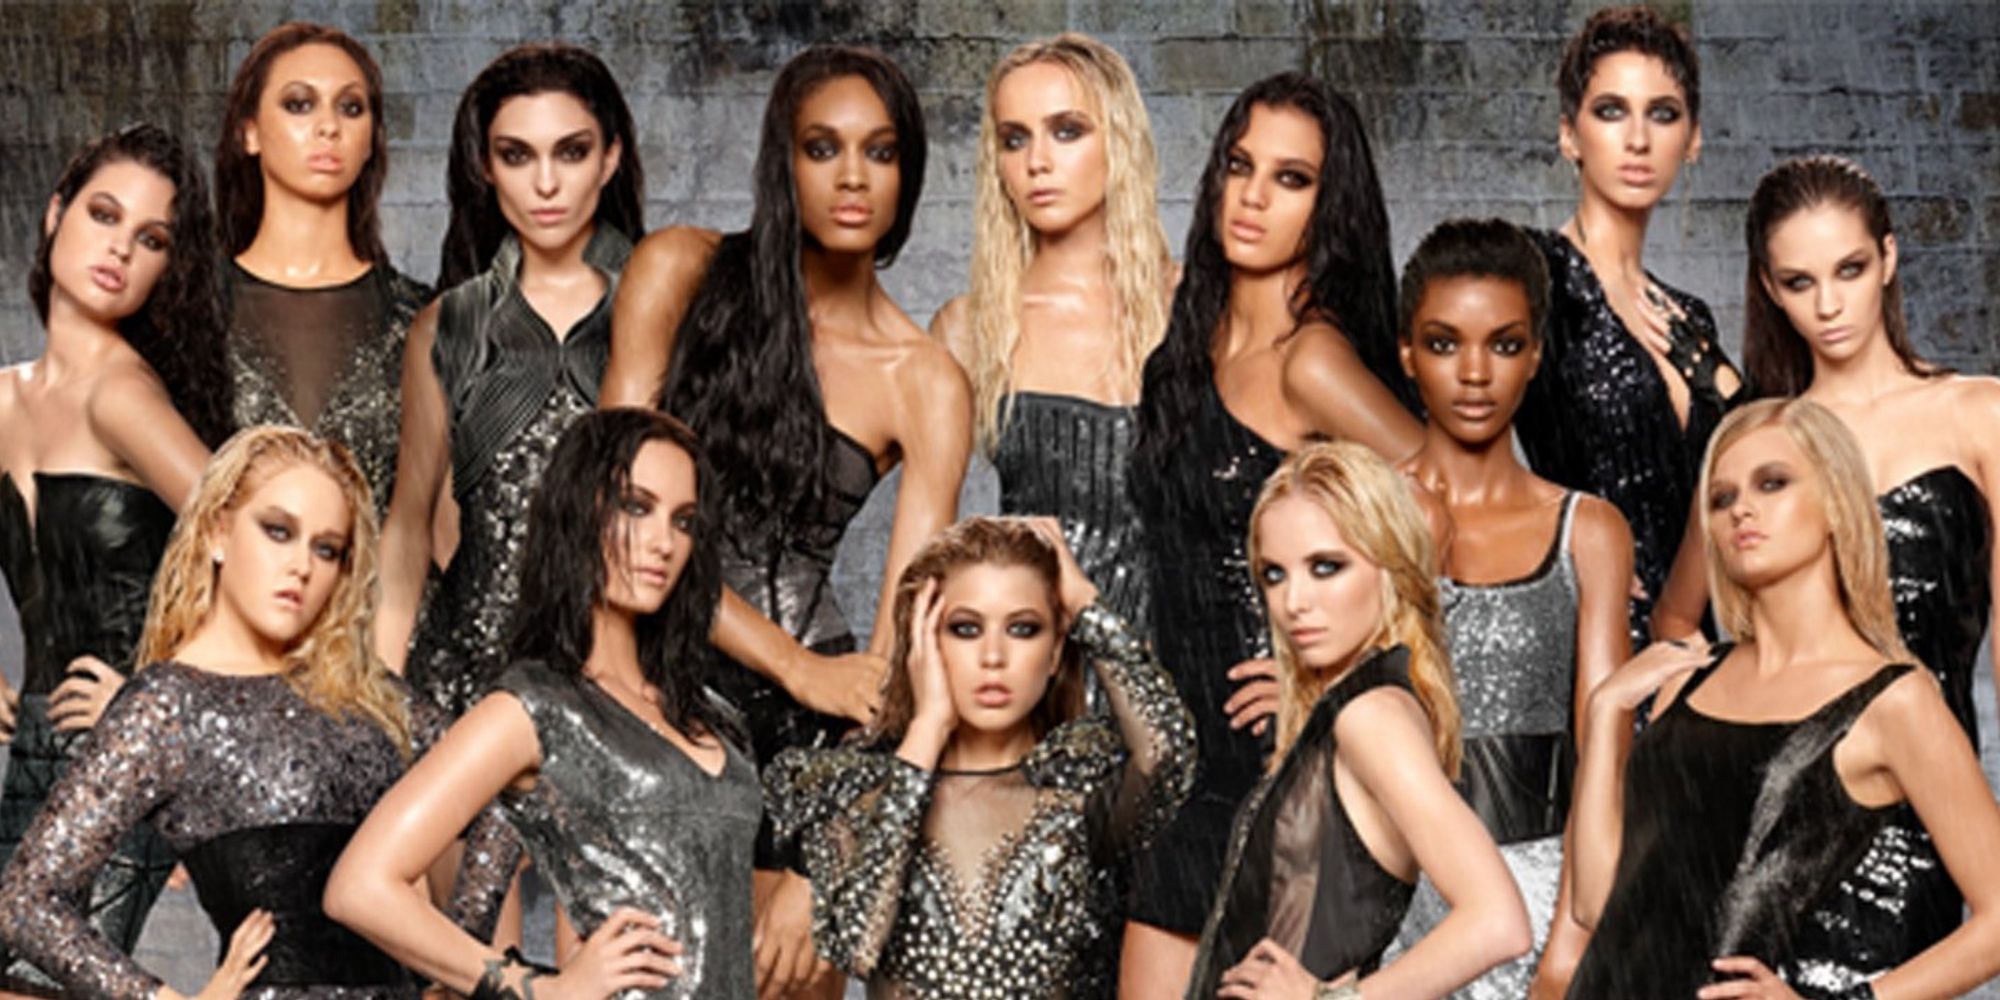 Americas Next Top Model The First 10 Seasons Ranked According To IMDb